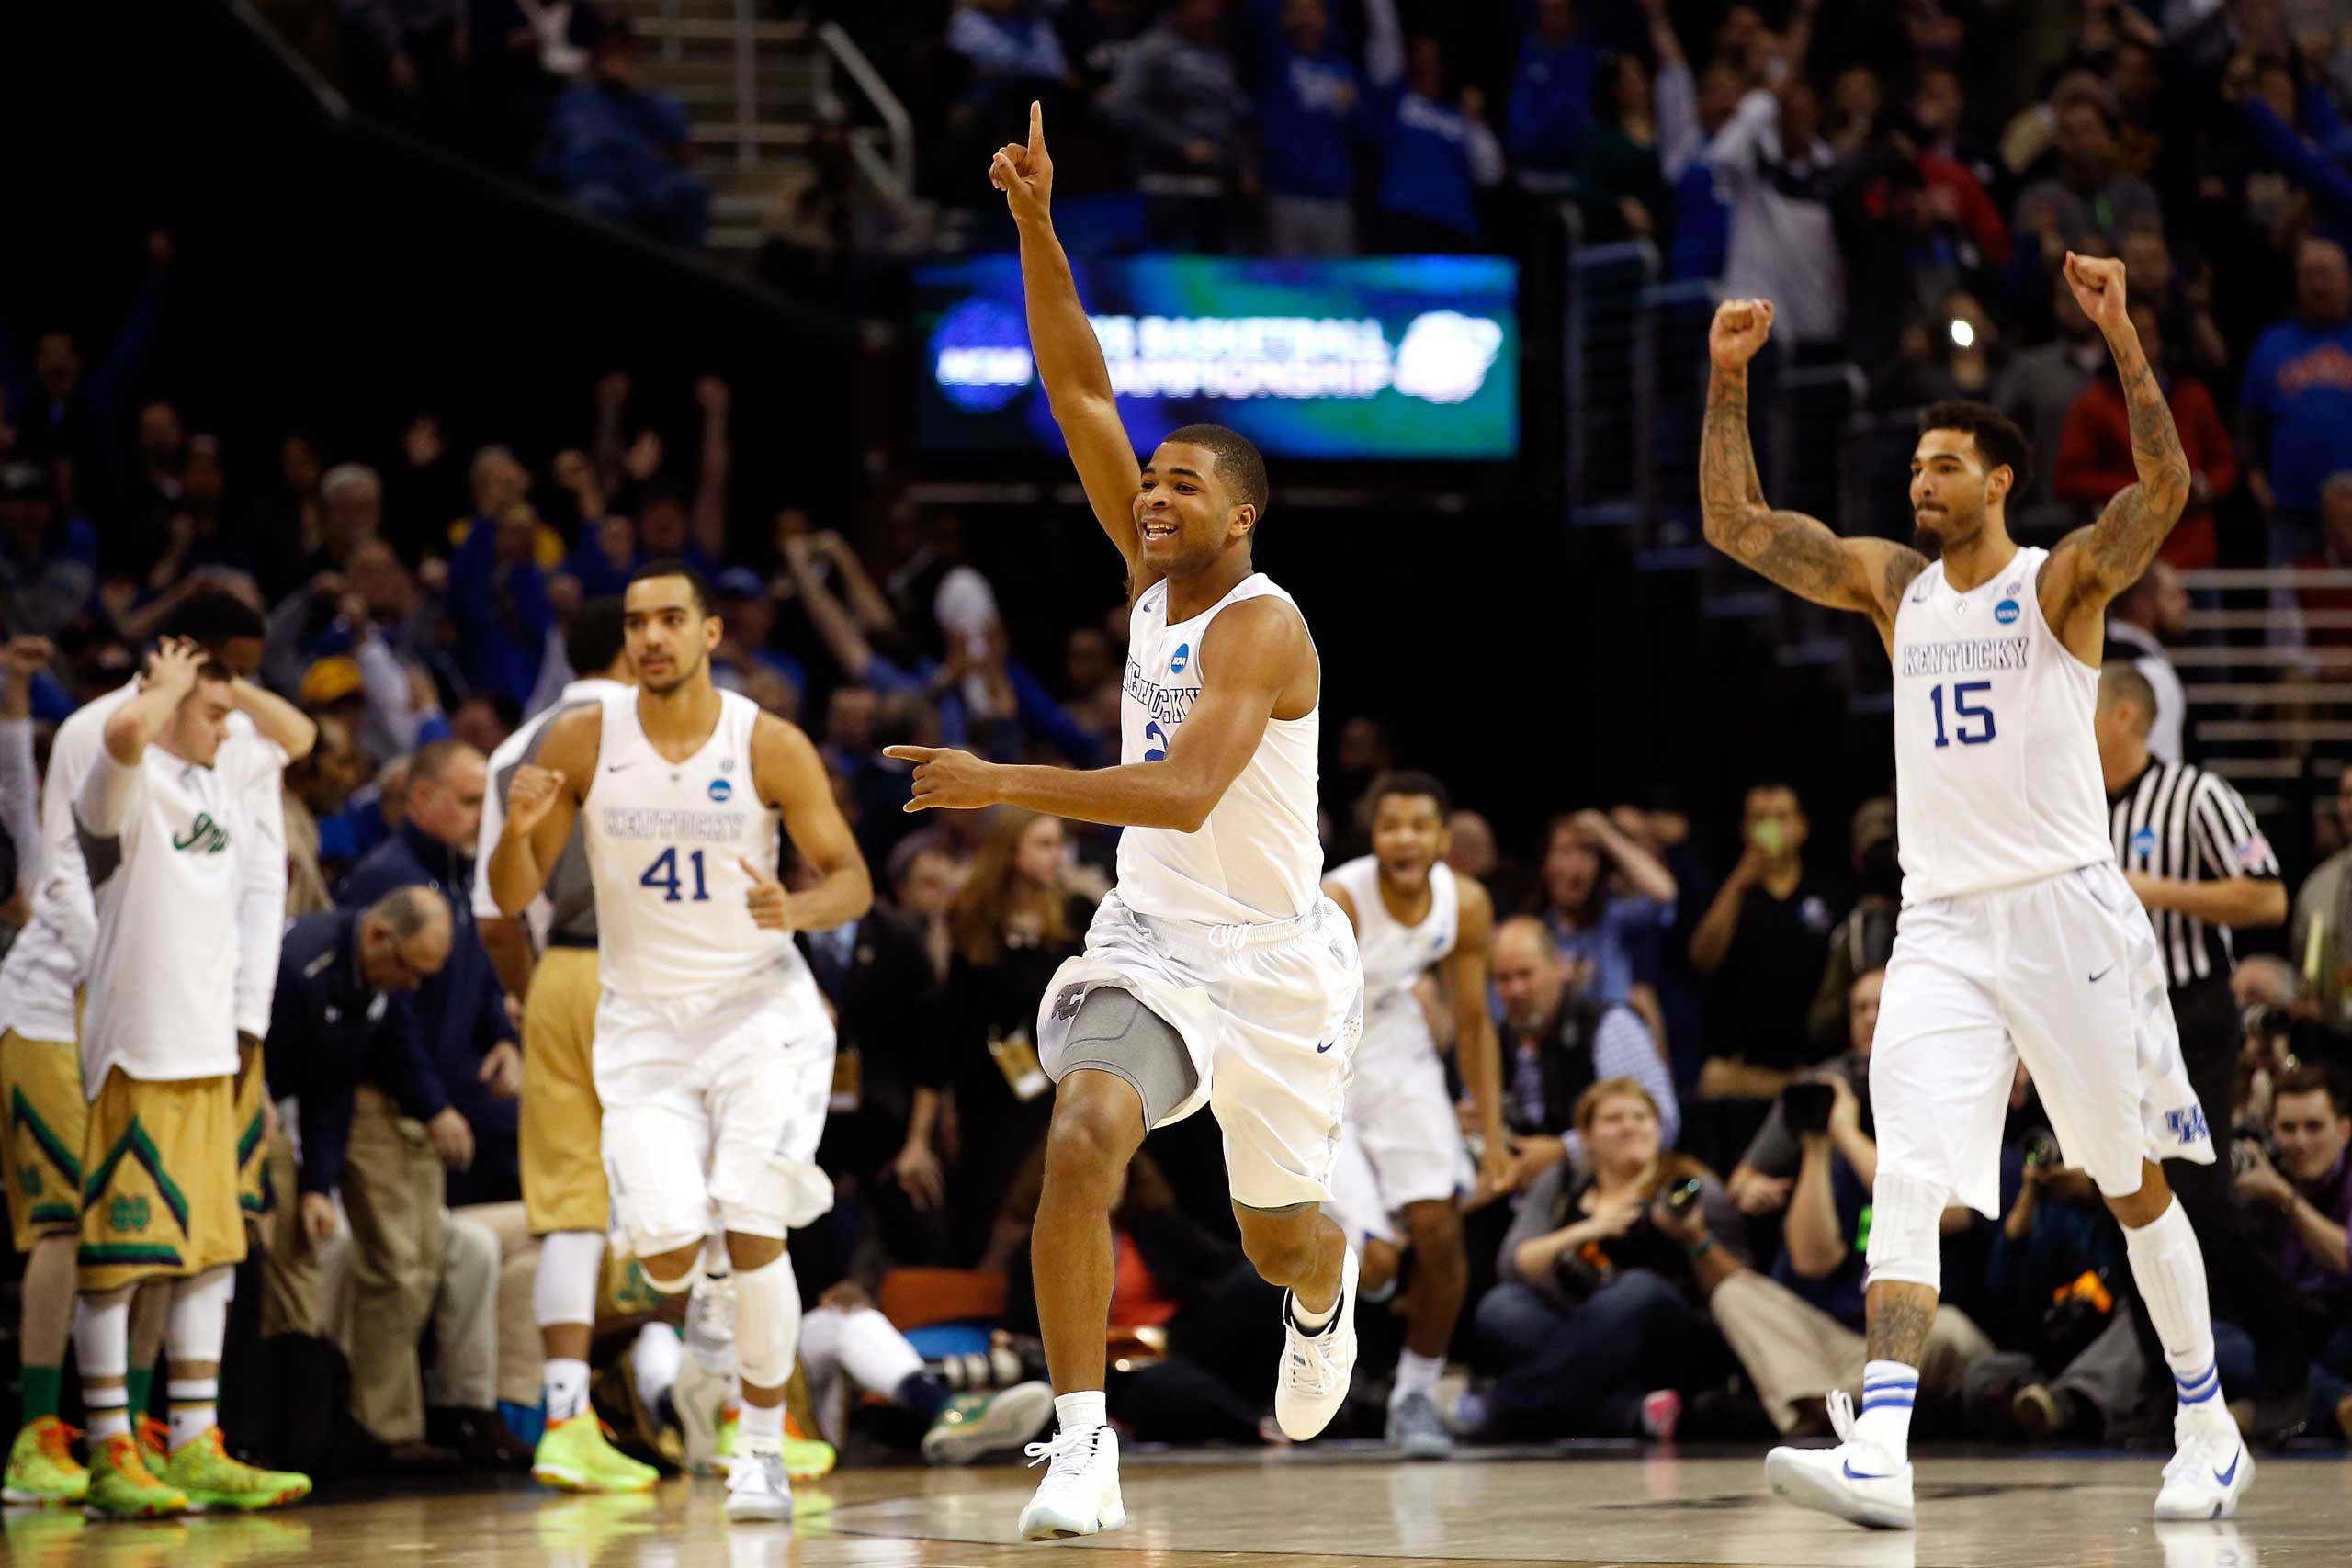 Aaron Harrison of the Kentucky Wildcats celebrates after defeating the Notre Dame Fighting Irish during the Midwest Regional Final of the 2015 NCAA Men's Basketball tournament at Quicken Loans Arena in Cleveland, on Mar. 28, 2015. (Gregory Shamus—Getty Images)